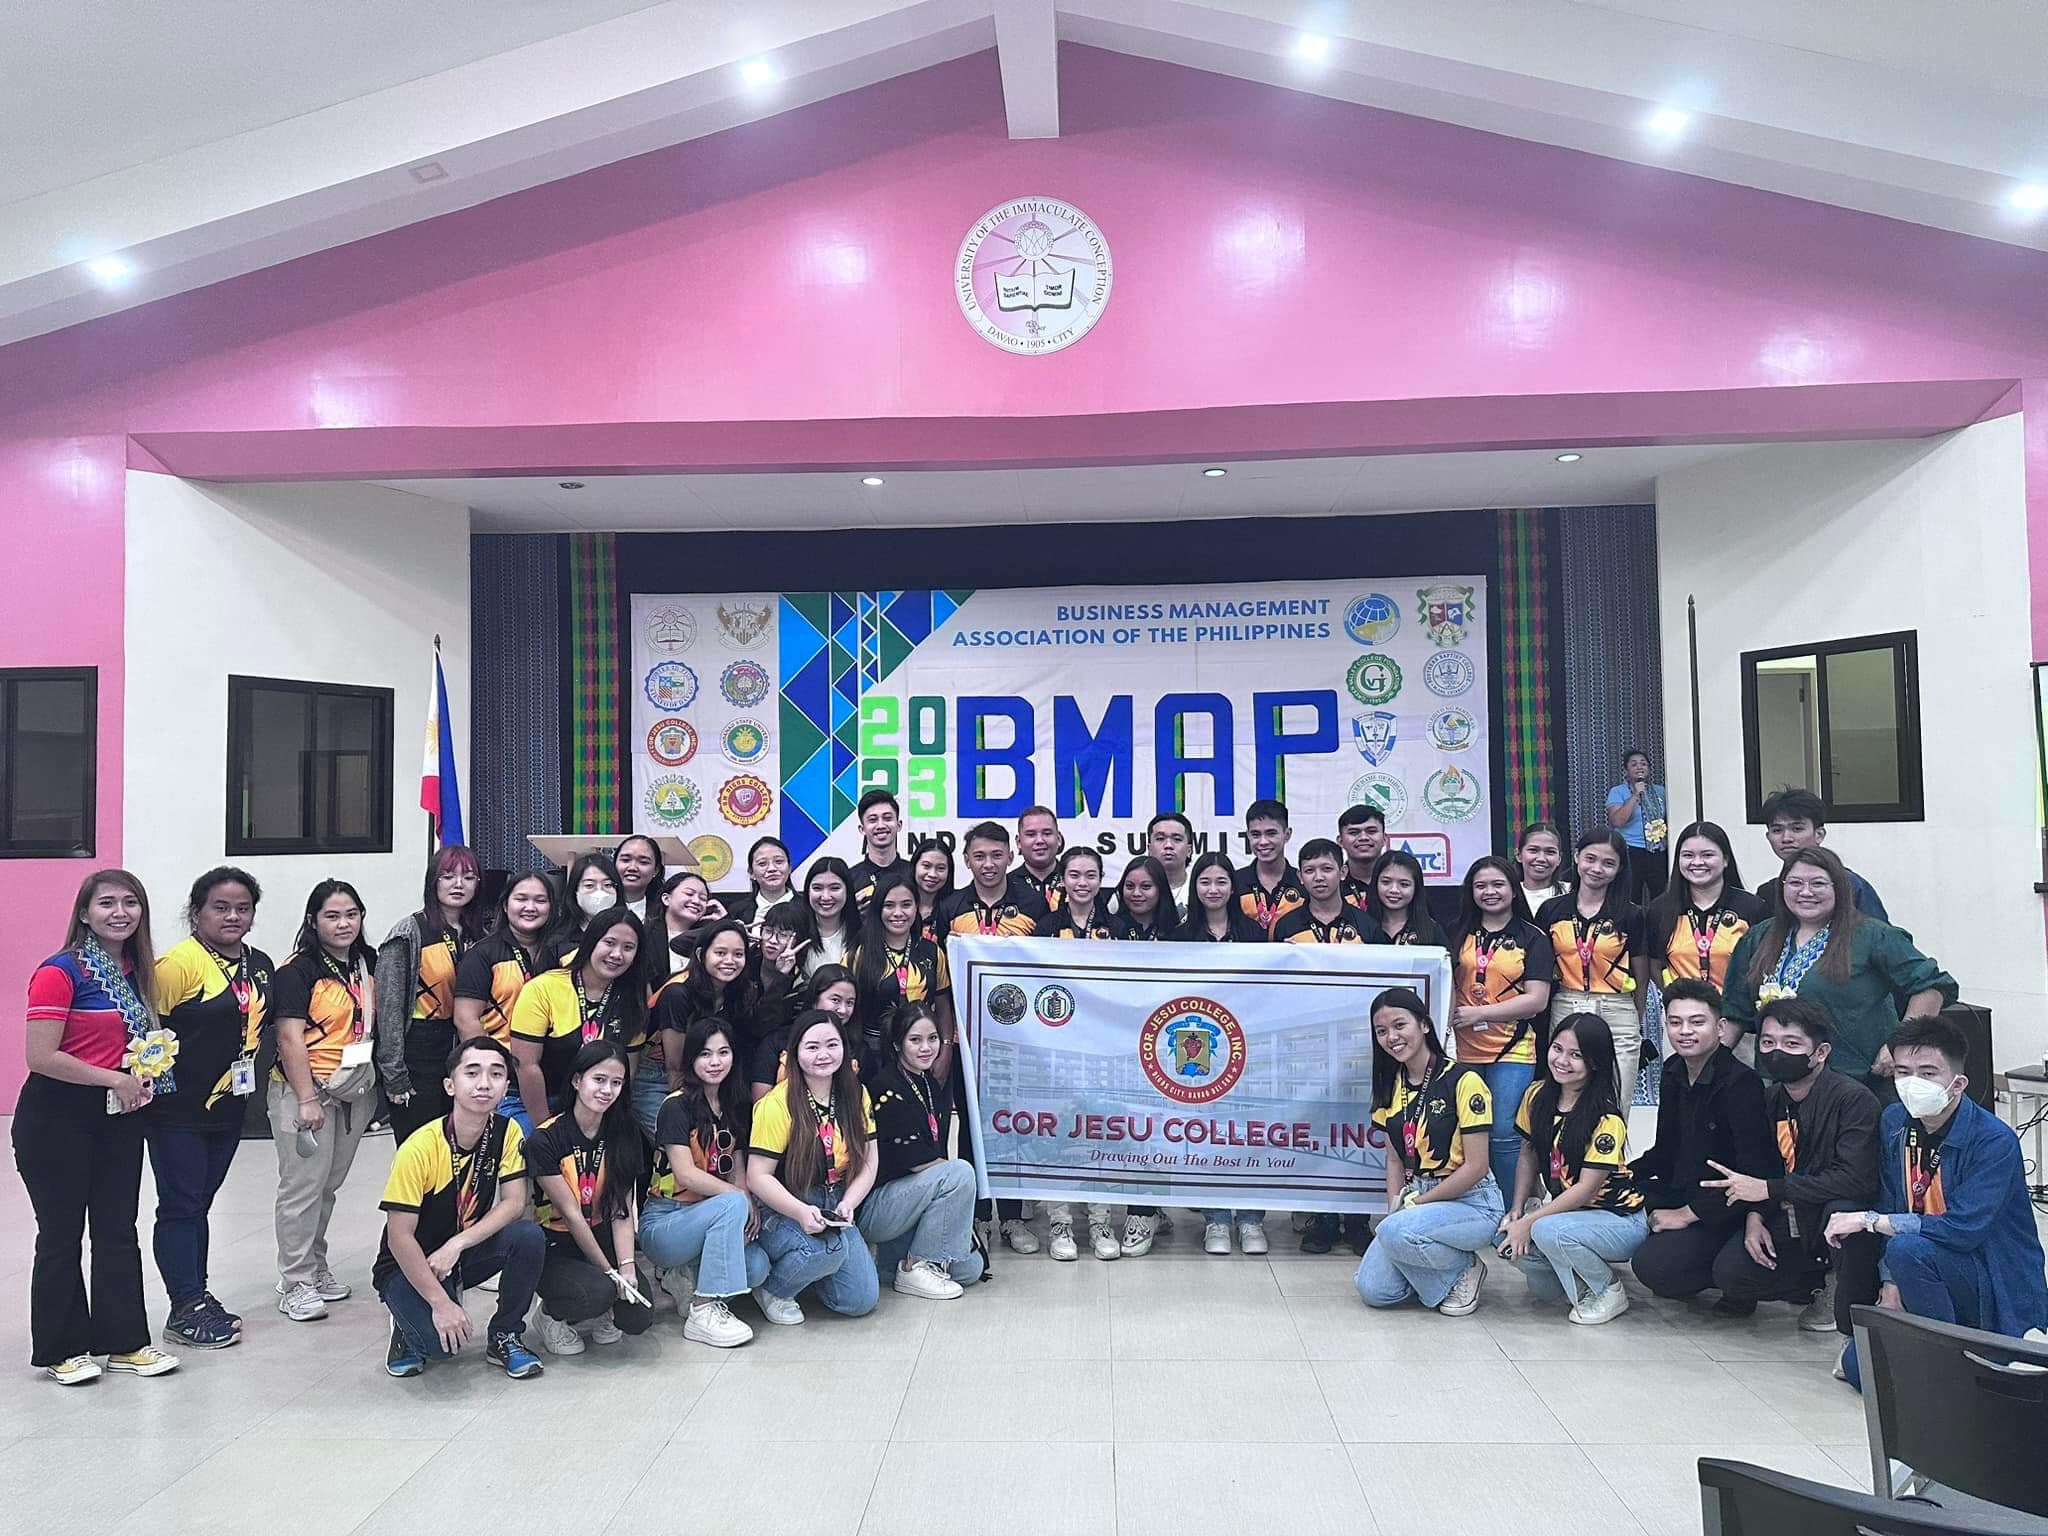 CJC BSBA Students: Bagged Awards in the 4th BMAP Mindanao Summit